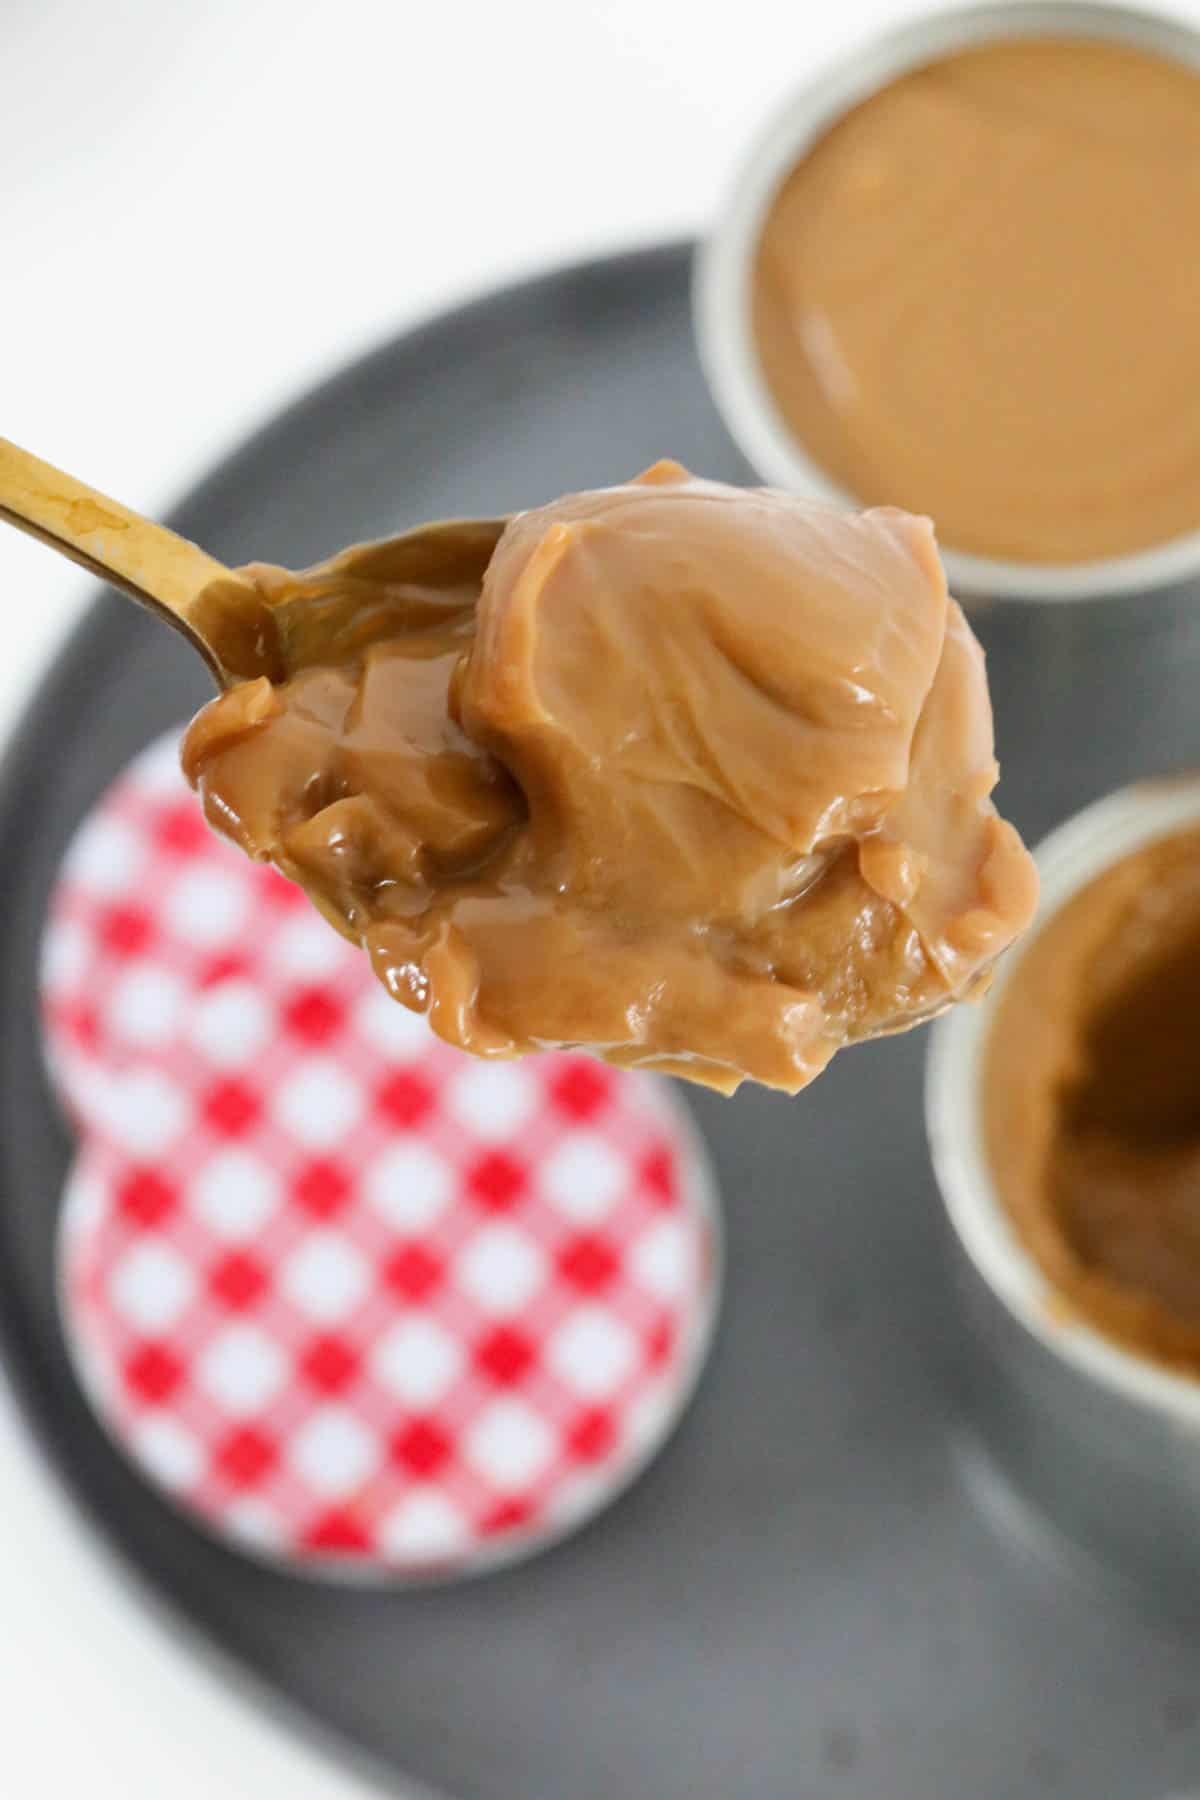 A close up of a spoon holding thickened condensed milk turned a caramel colour.